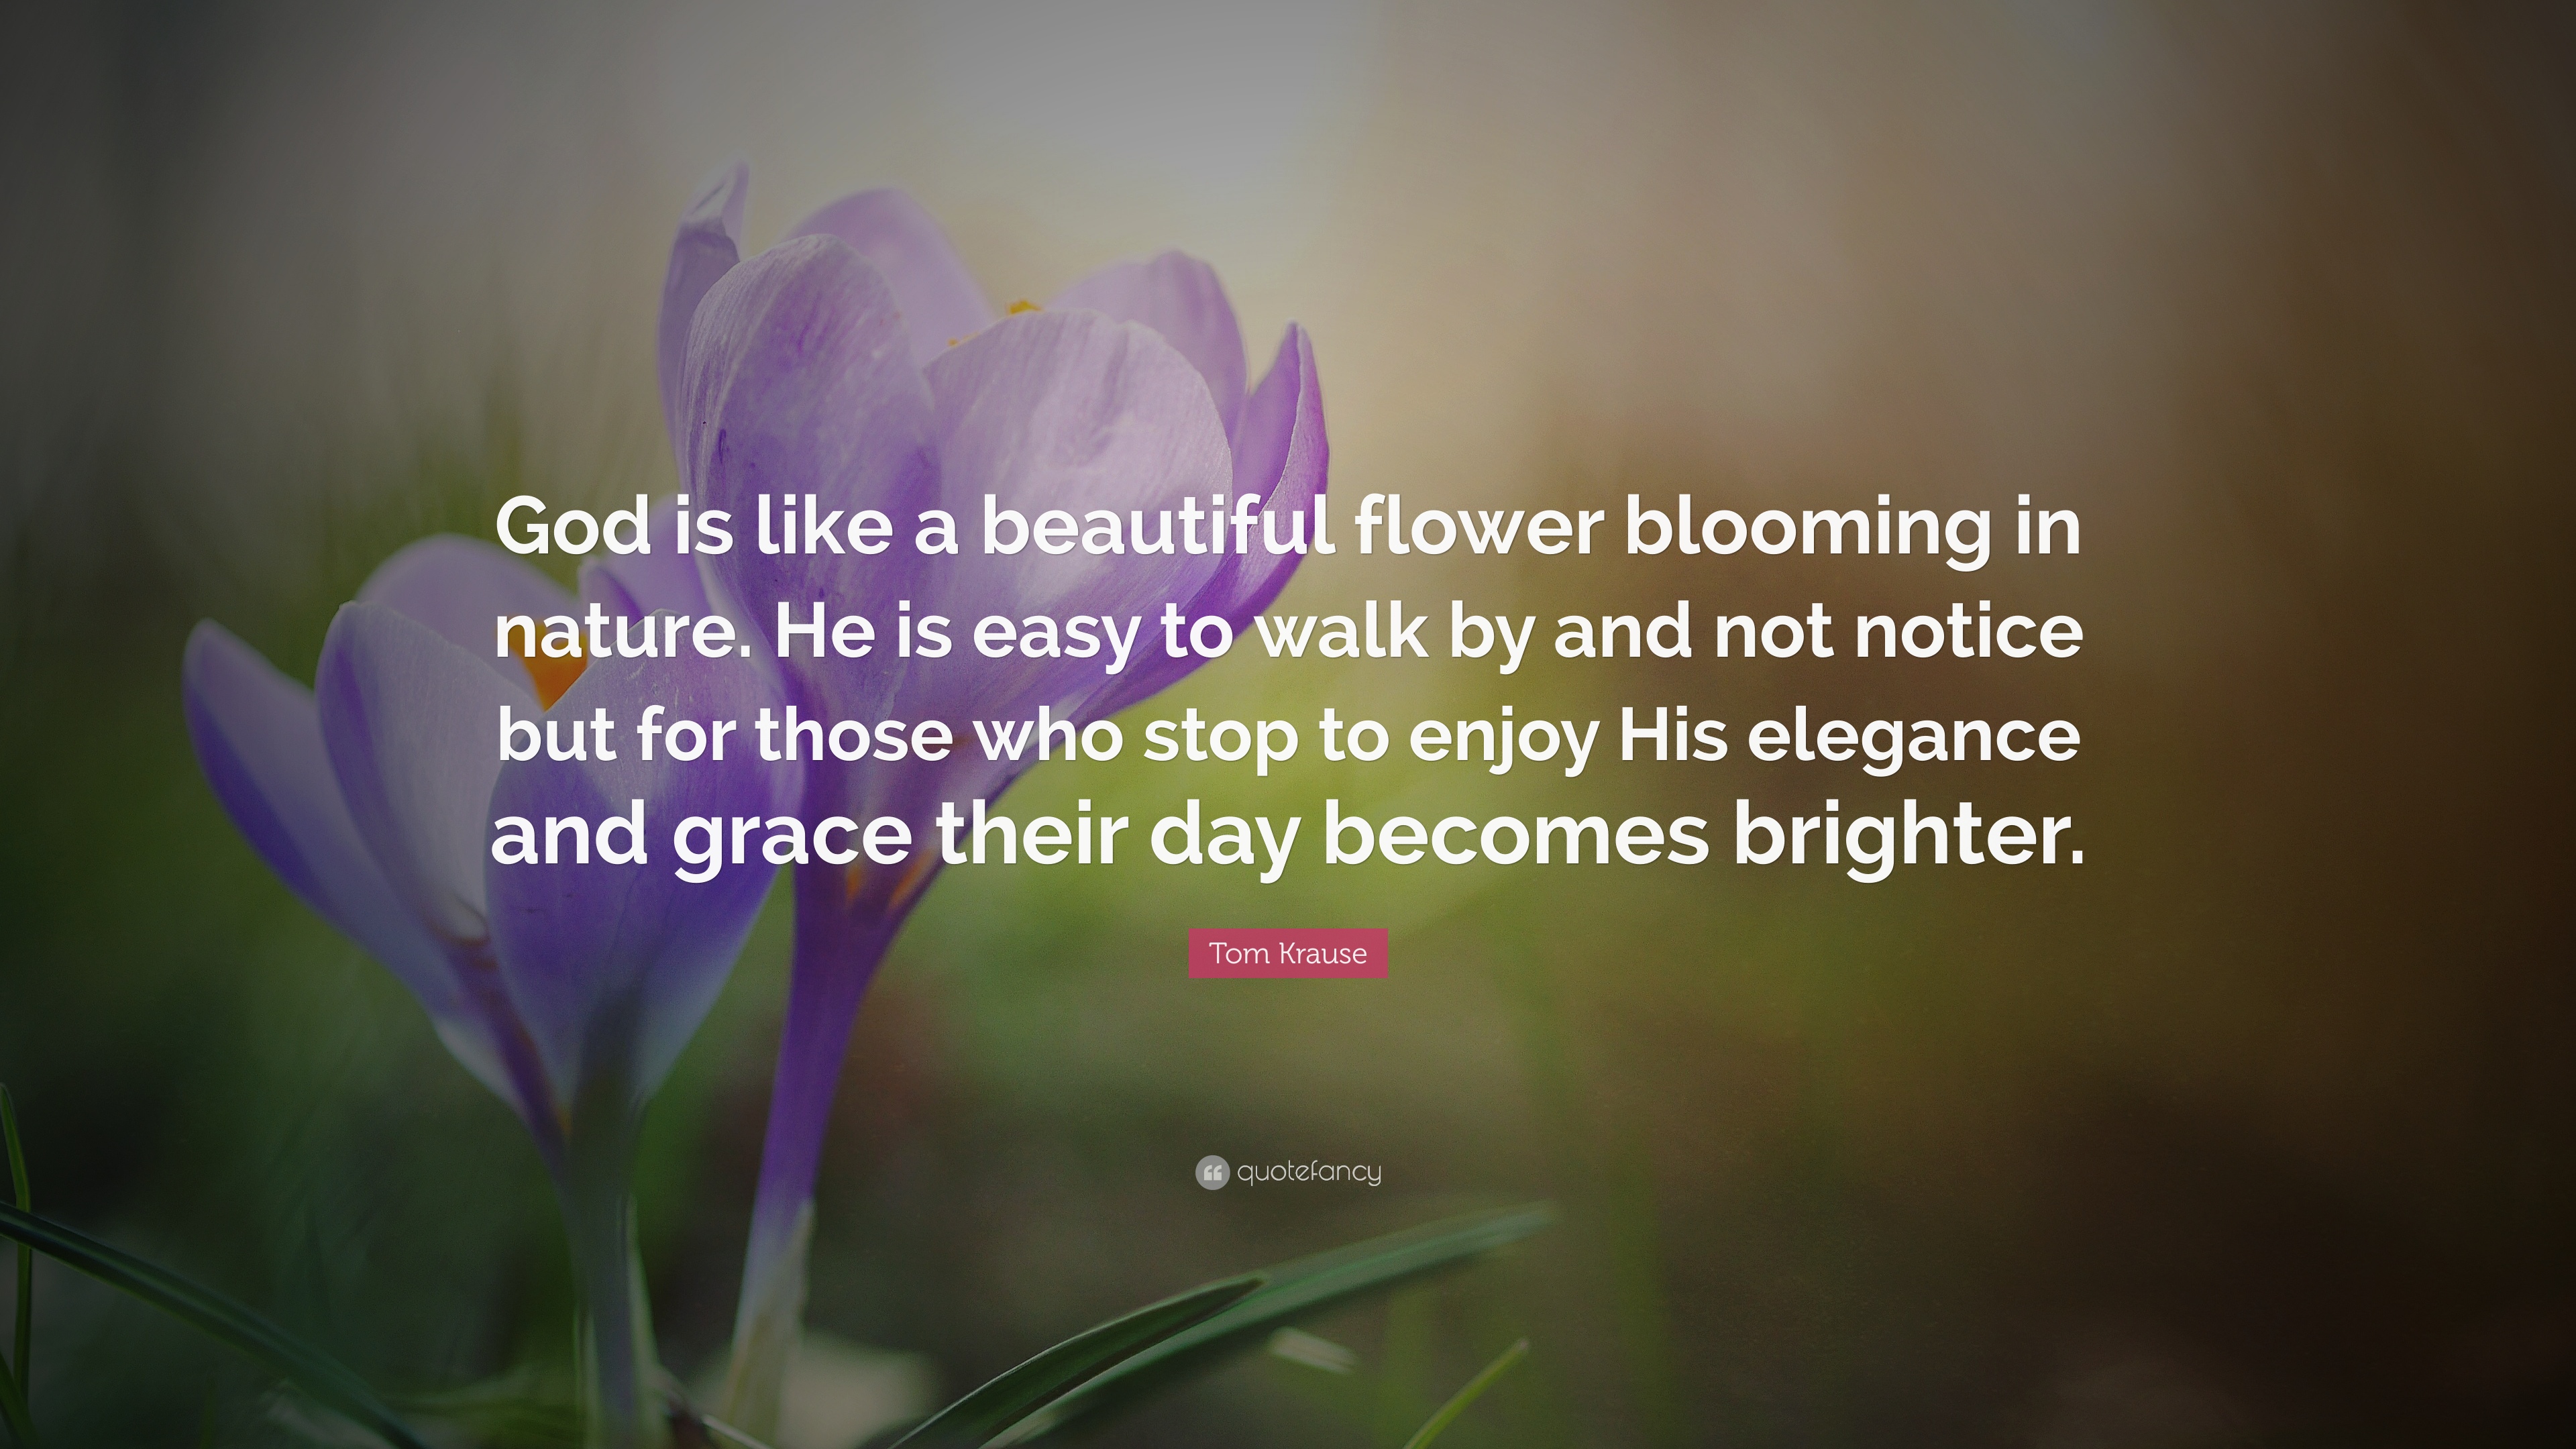 Tom Krause Quote: “God is like a beautiful flower blooming in nature ...